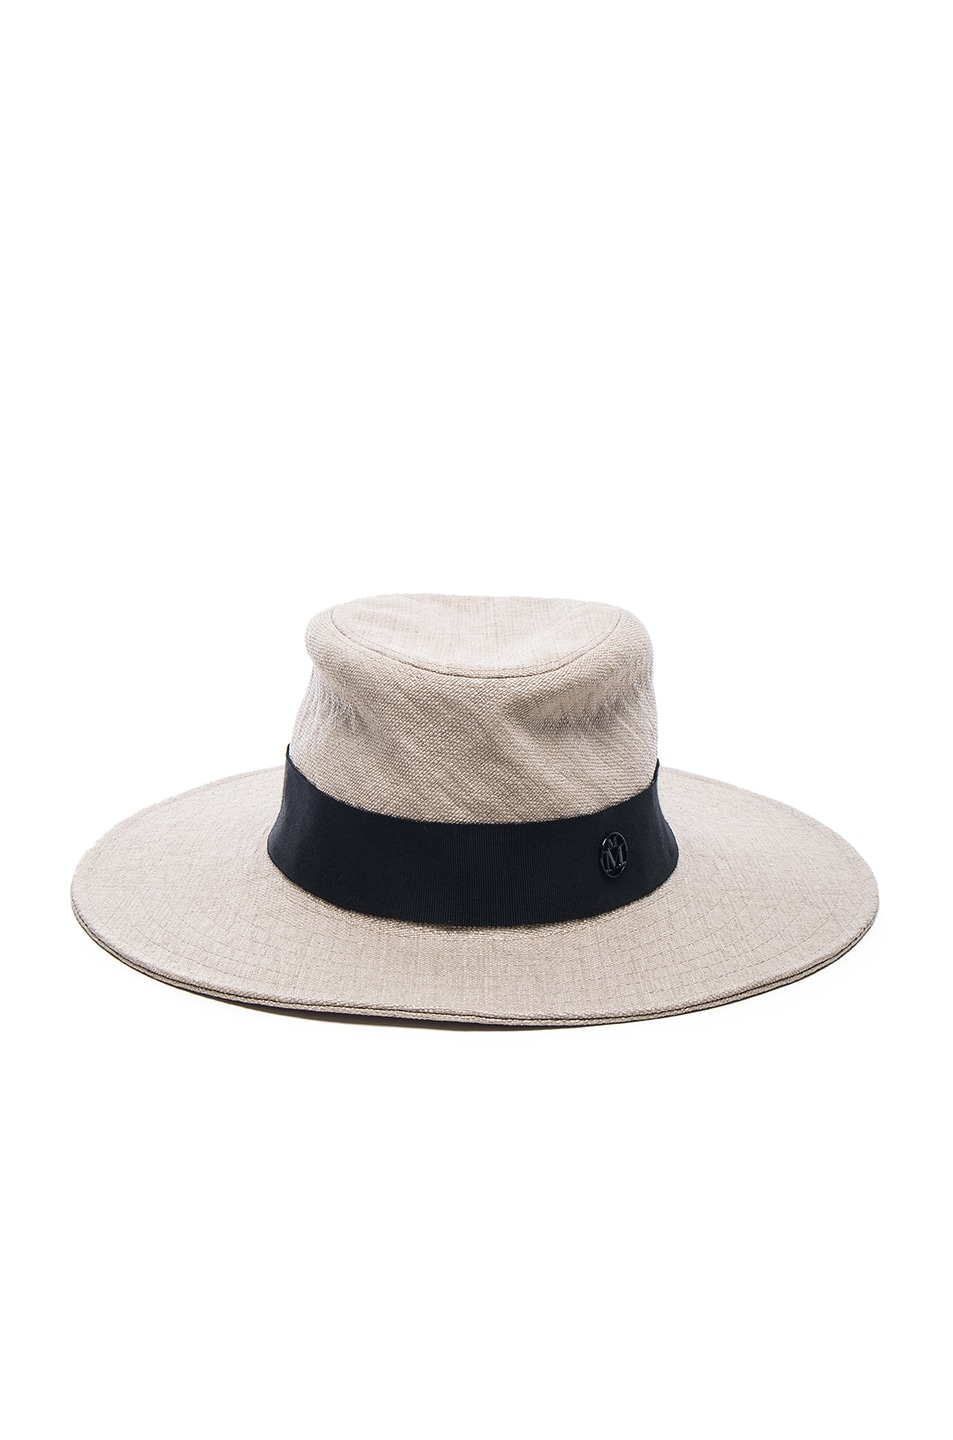 Image 1 of Maison Michel Charles Classic Trilby Straw Hat in Natural Black